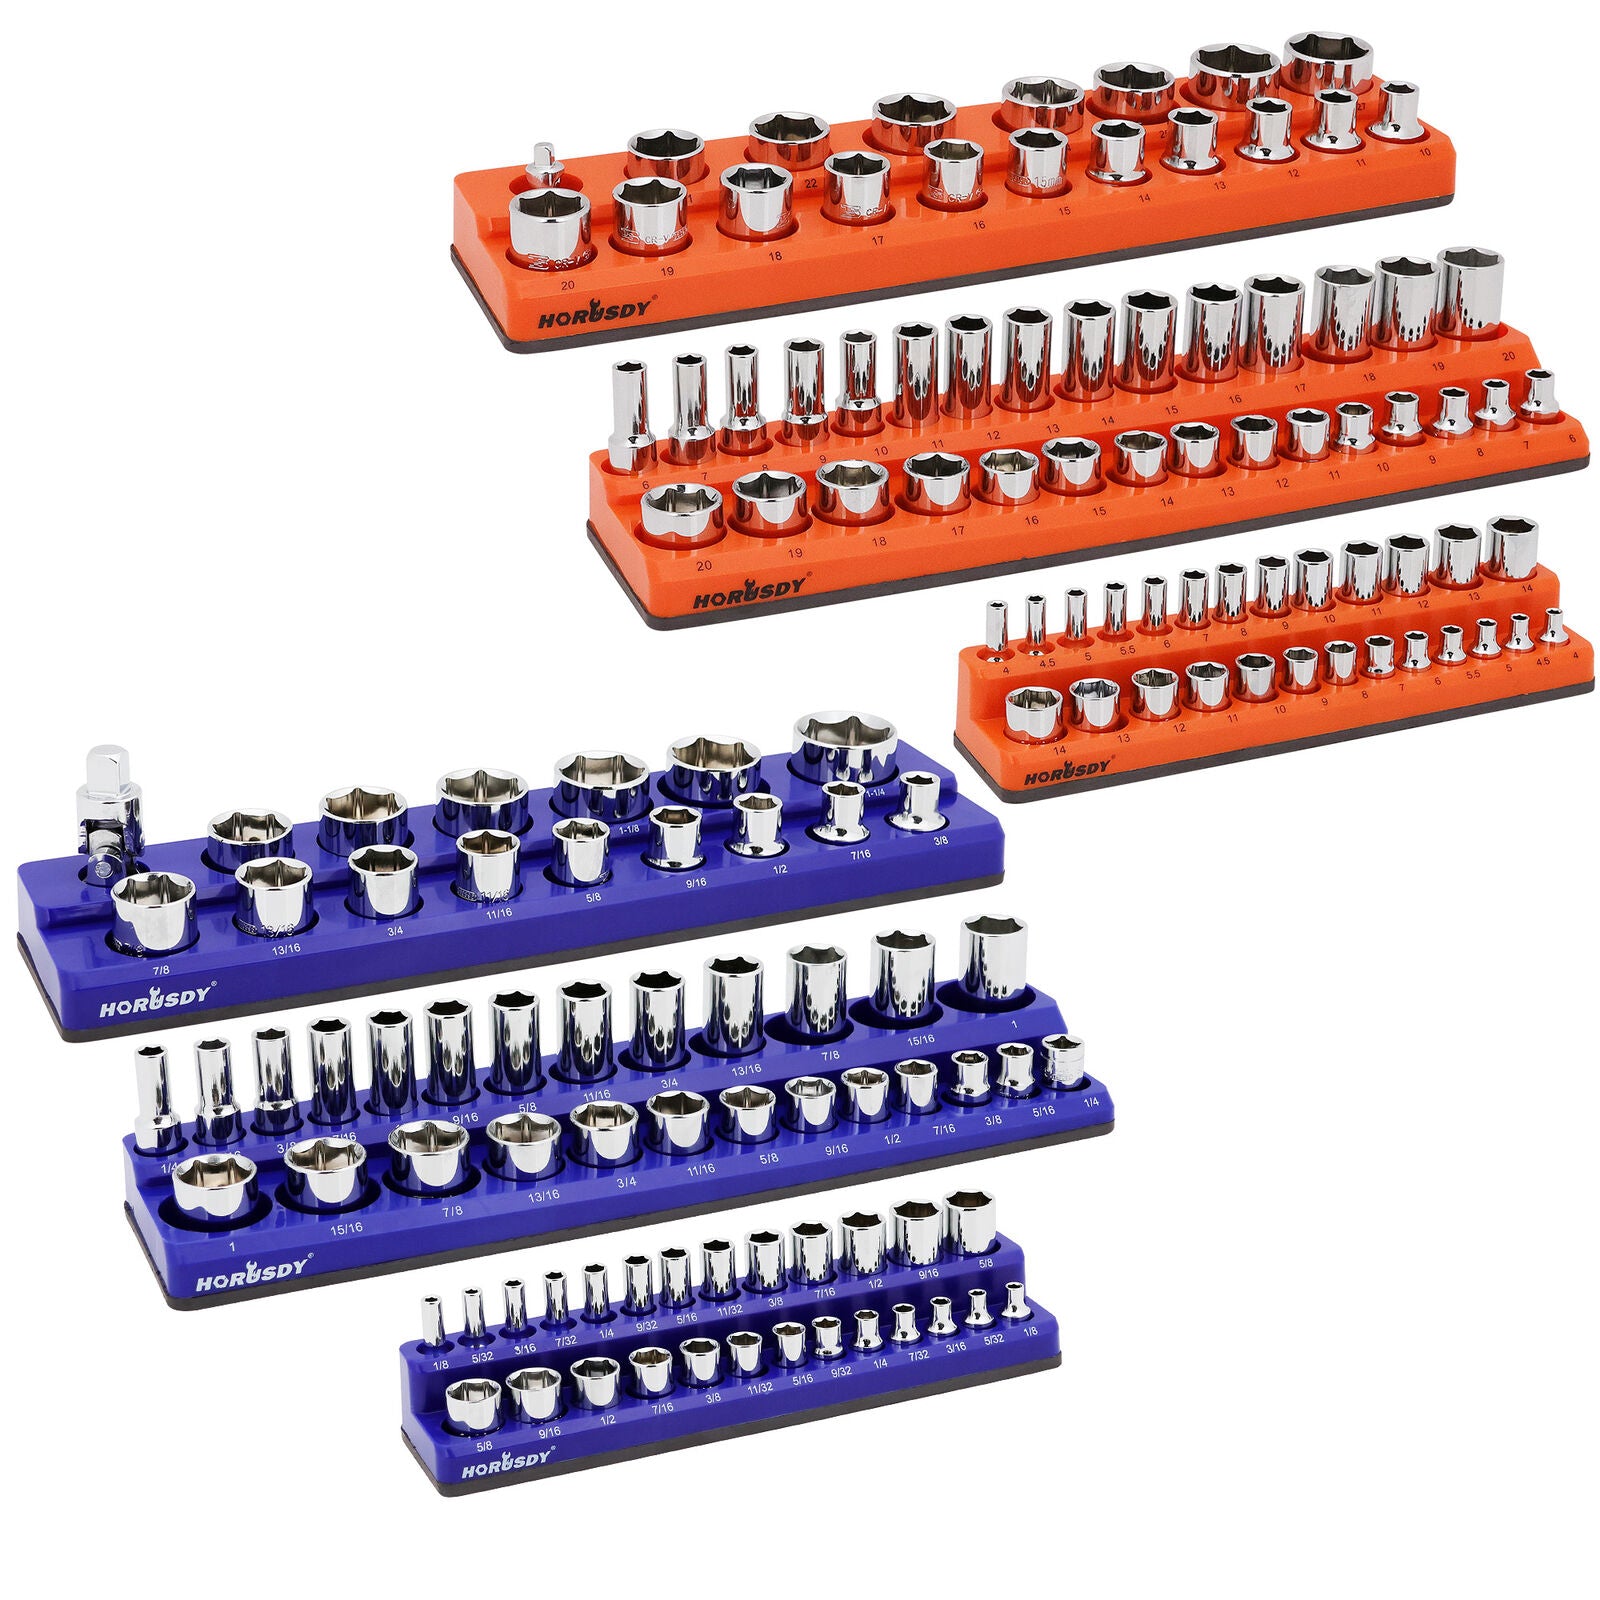 6-piece magnetic socket organizer set with orange and blue holders for SAE and metric sockets